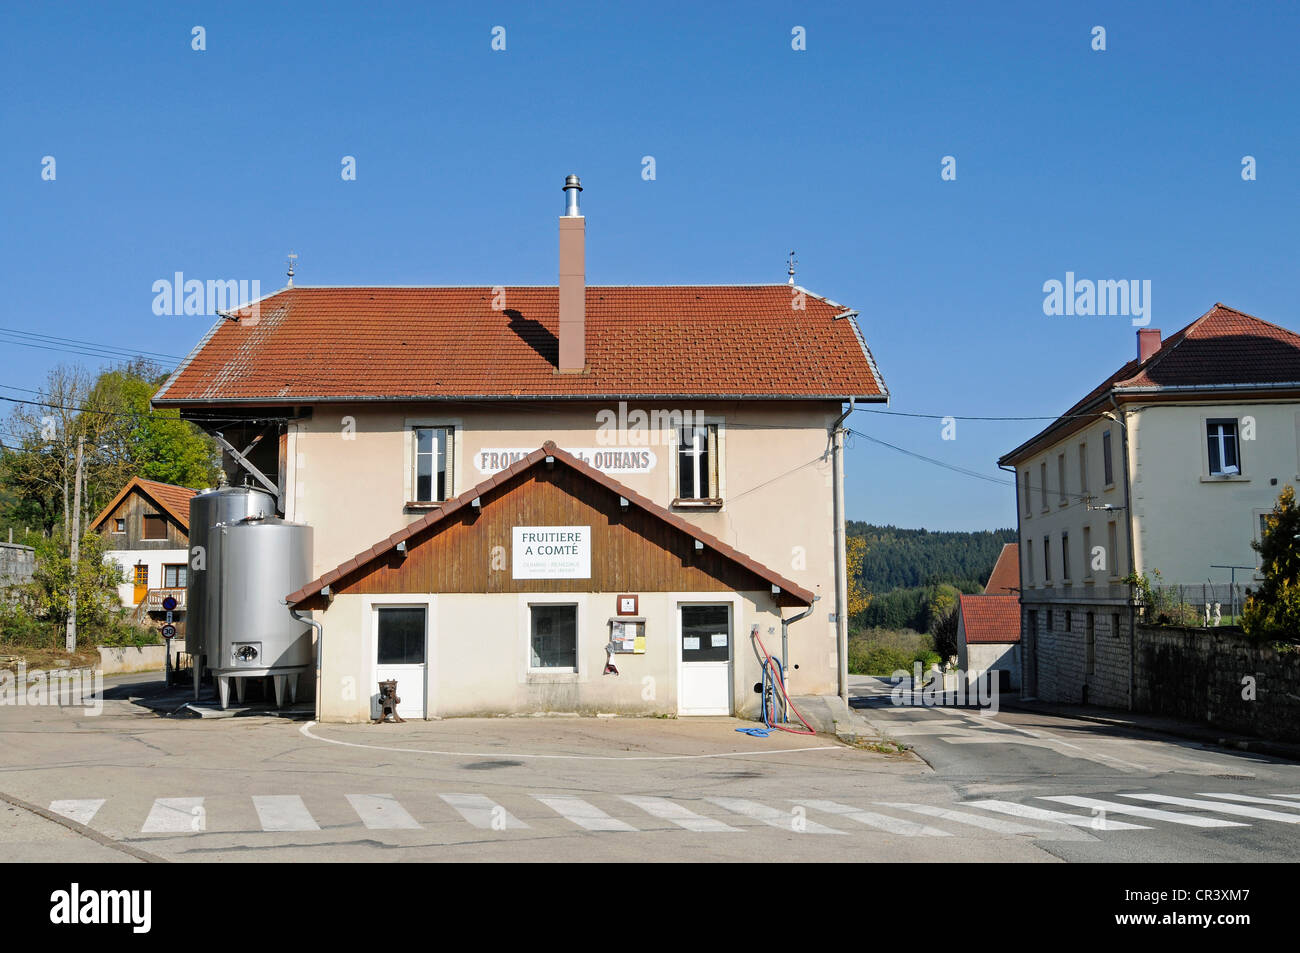 Cheese dairy, Ouhans, Pontarlier, departement of Doubs, Franche-Comte, France, Europe, PublicGround Stock Photo